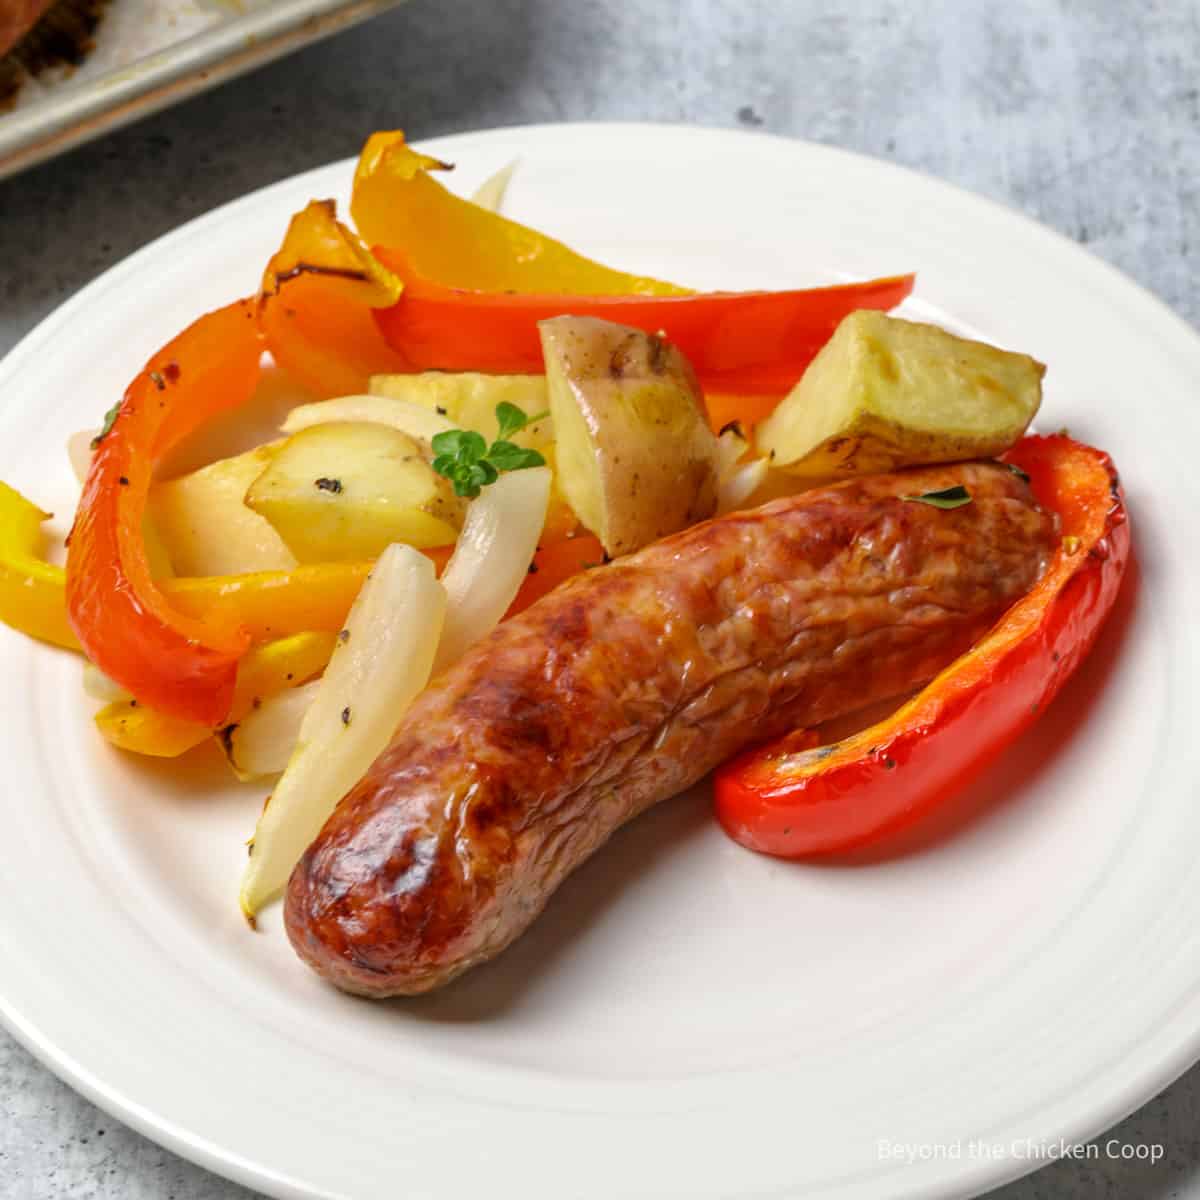 A sausage on a plate with pepper and onion slices.